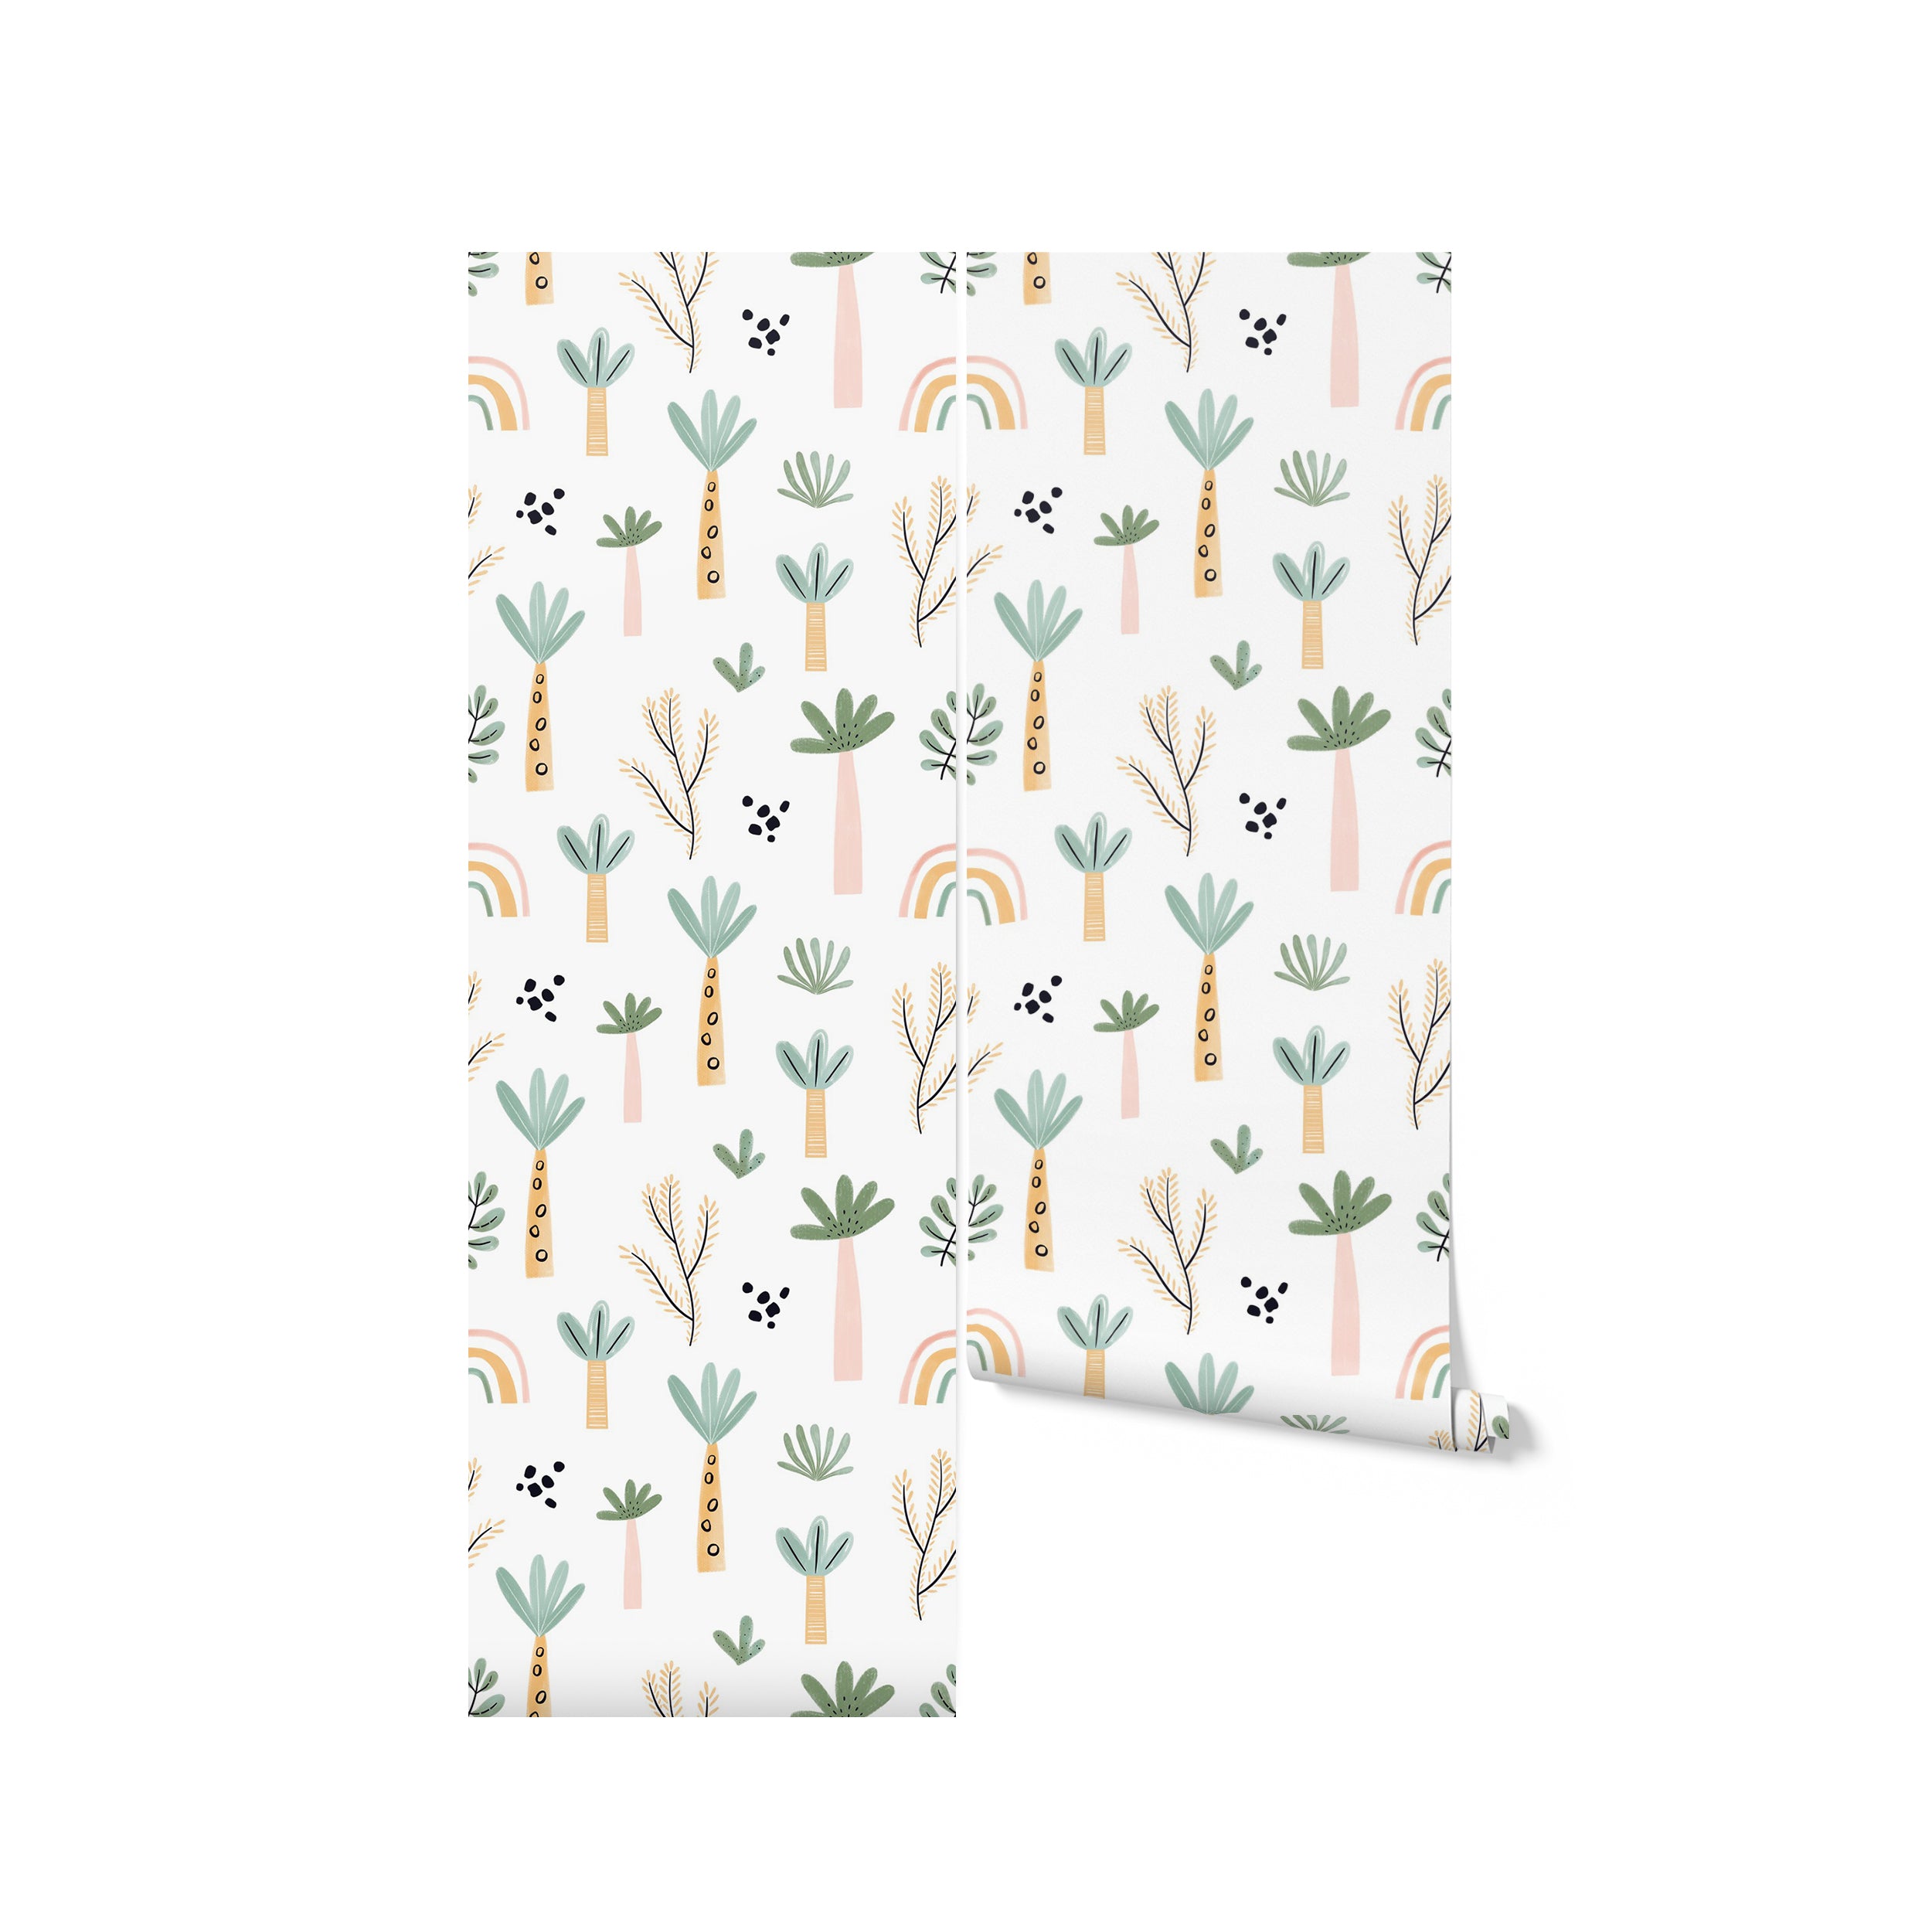 A roll of Tropical Kids Room Wallpaper with a joyful mix of trees, leaves, and rainbows in pastel colors, perfect for adding a touch of whimsy and warmth to a child's bedroom or play area.